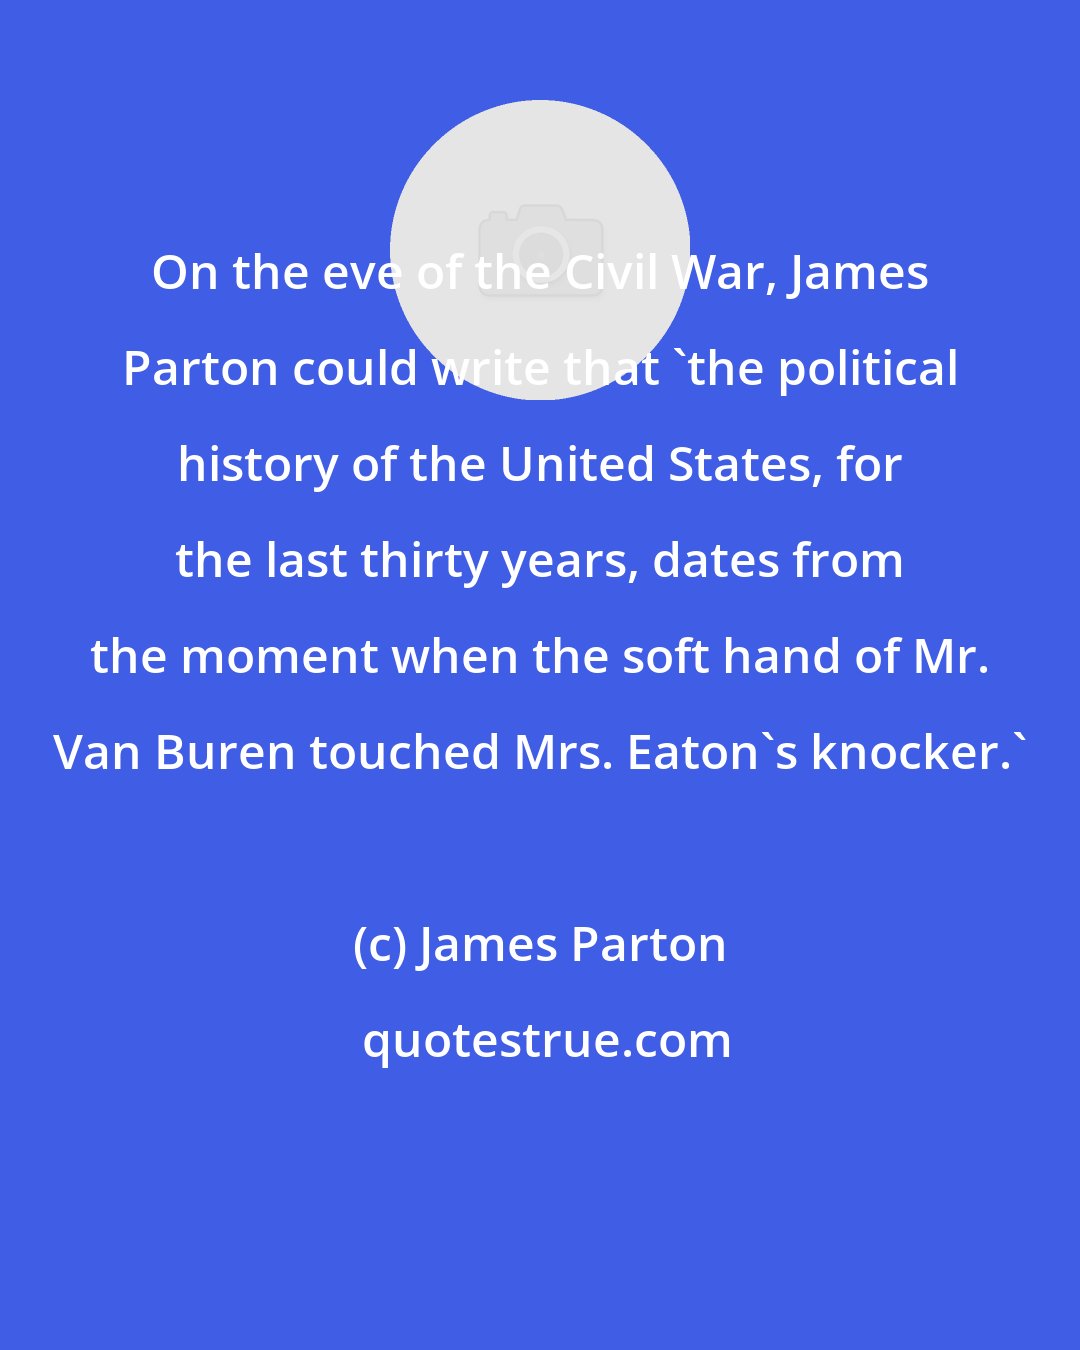 James Parton: On the eve of the Civil War, James Parton could write that 'the political history of the United States, for the last thirty years, dates from the moment when the soft hand of Mr. Van Buren touched Mrs. Eaton's knocker.'